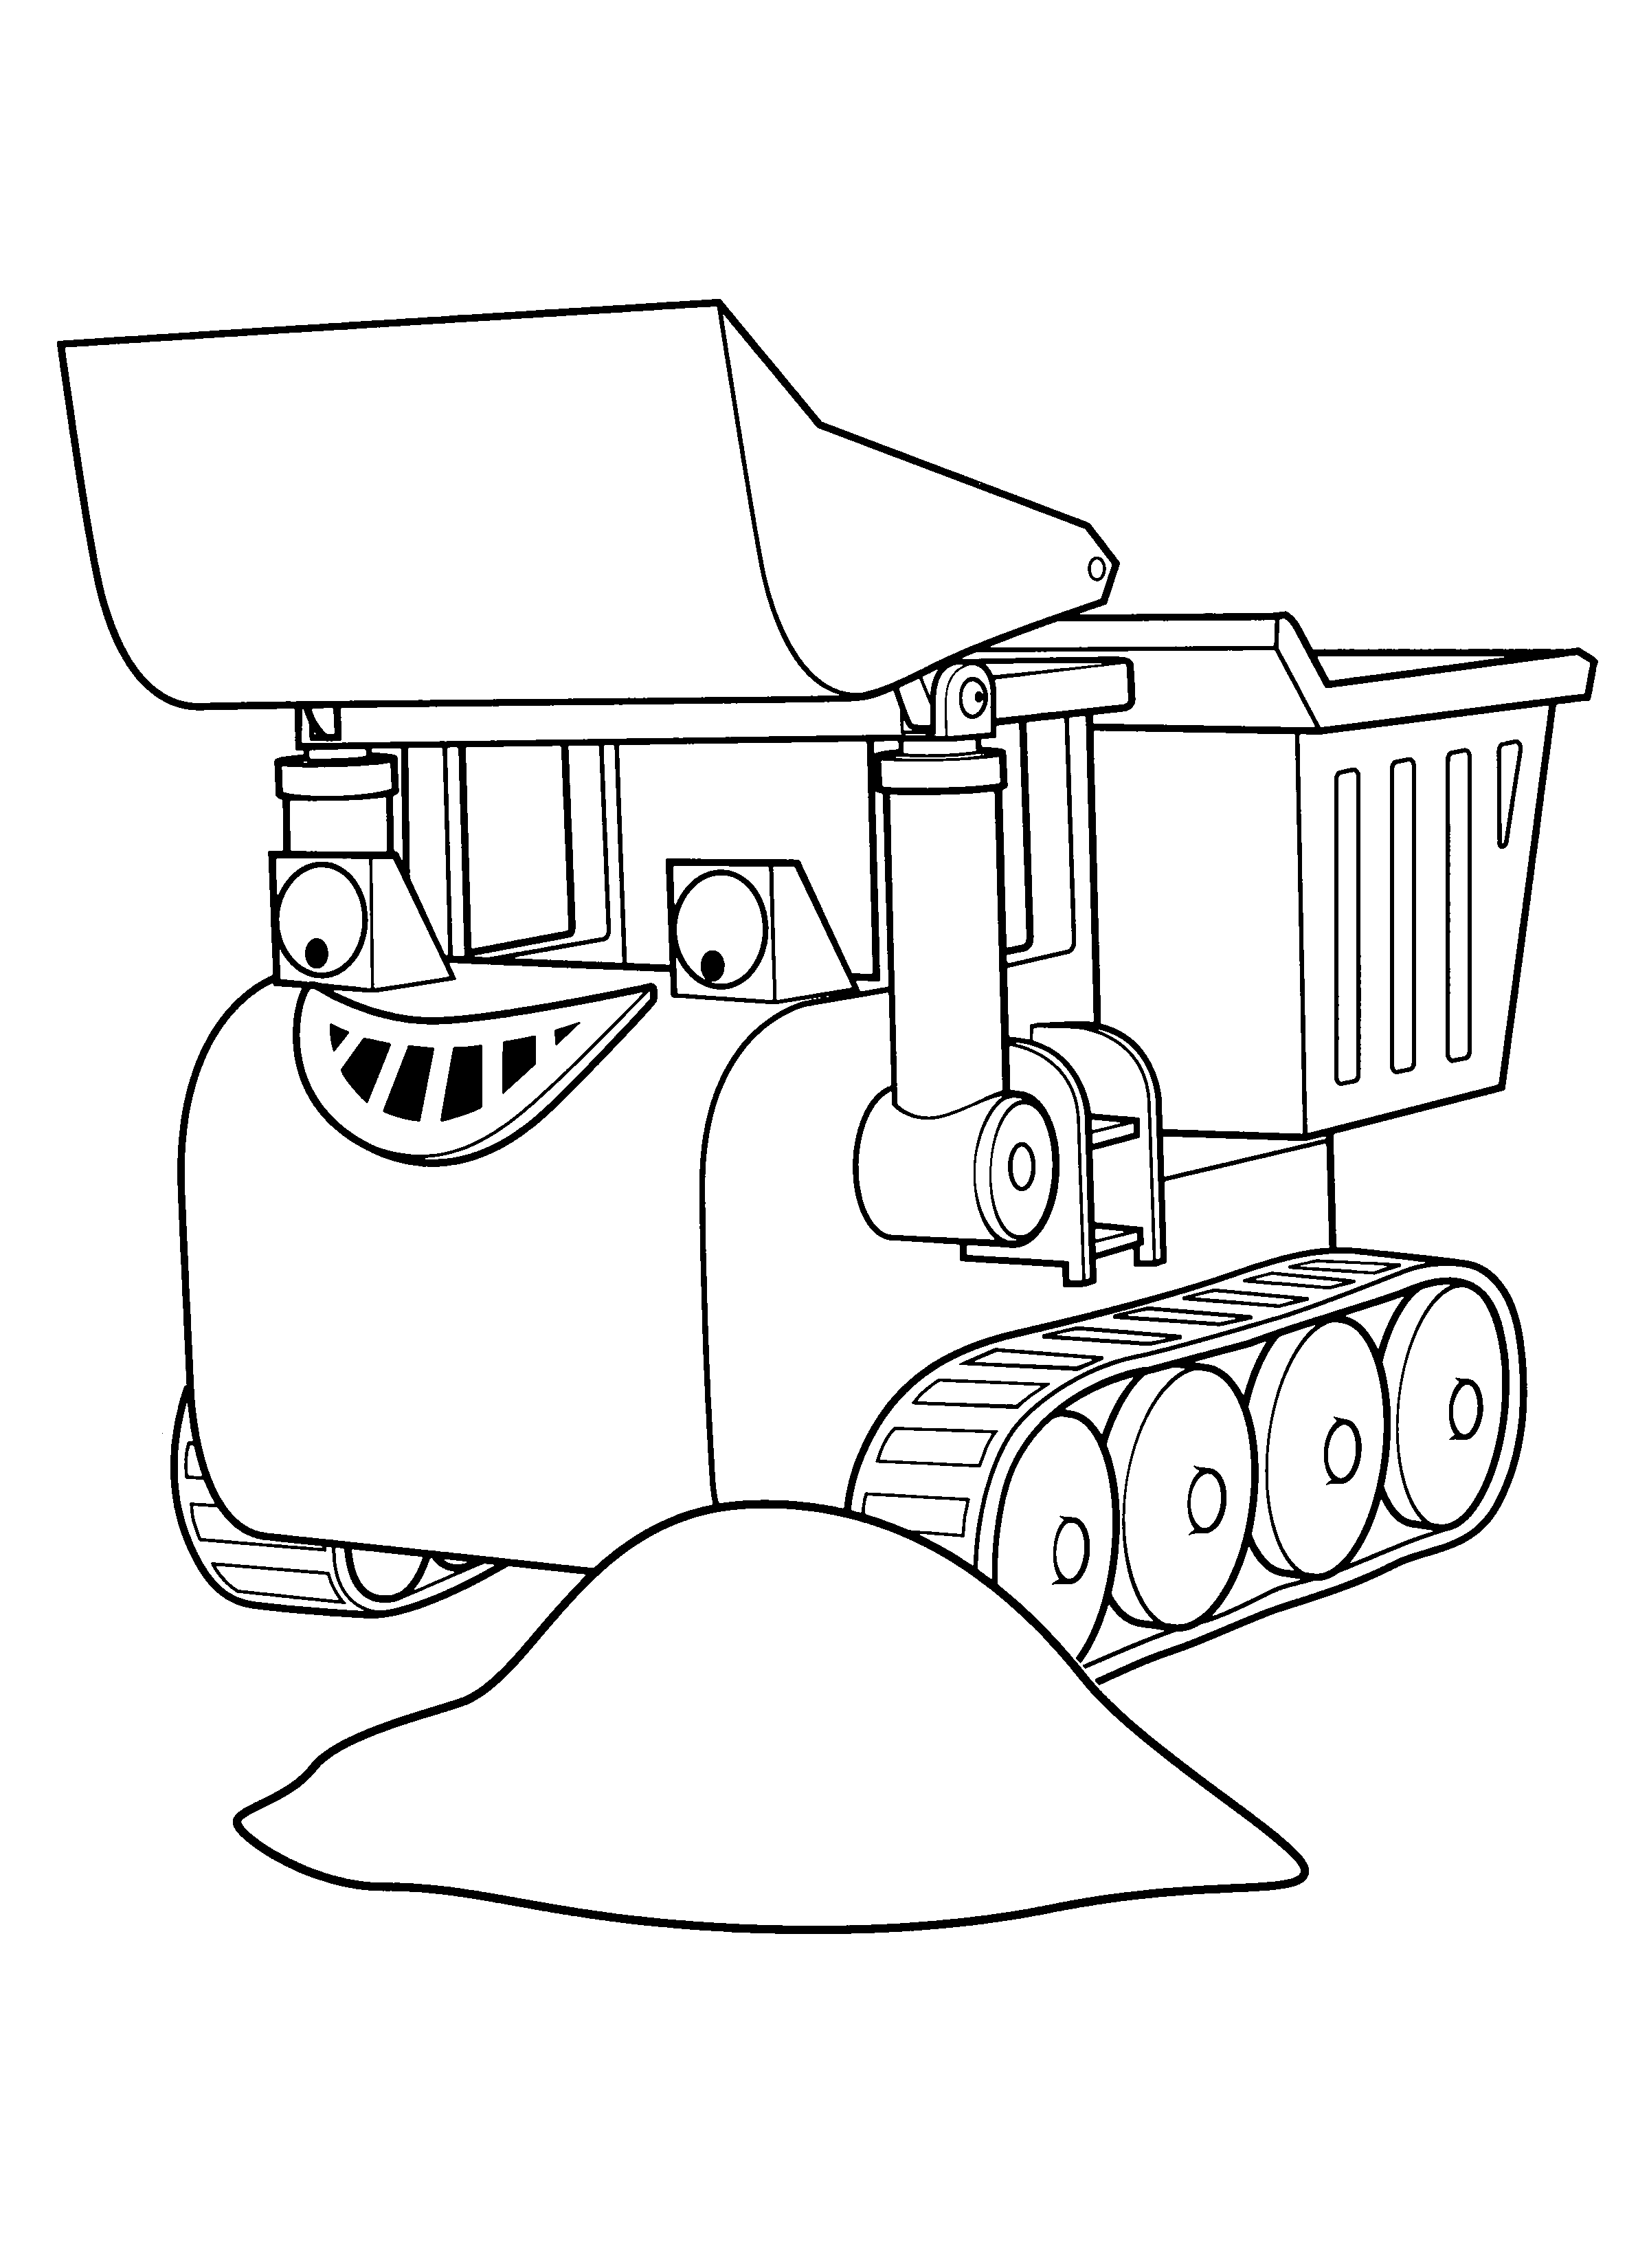 Coloring Page - Bob the builder coloring pages 16